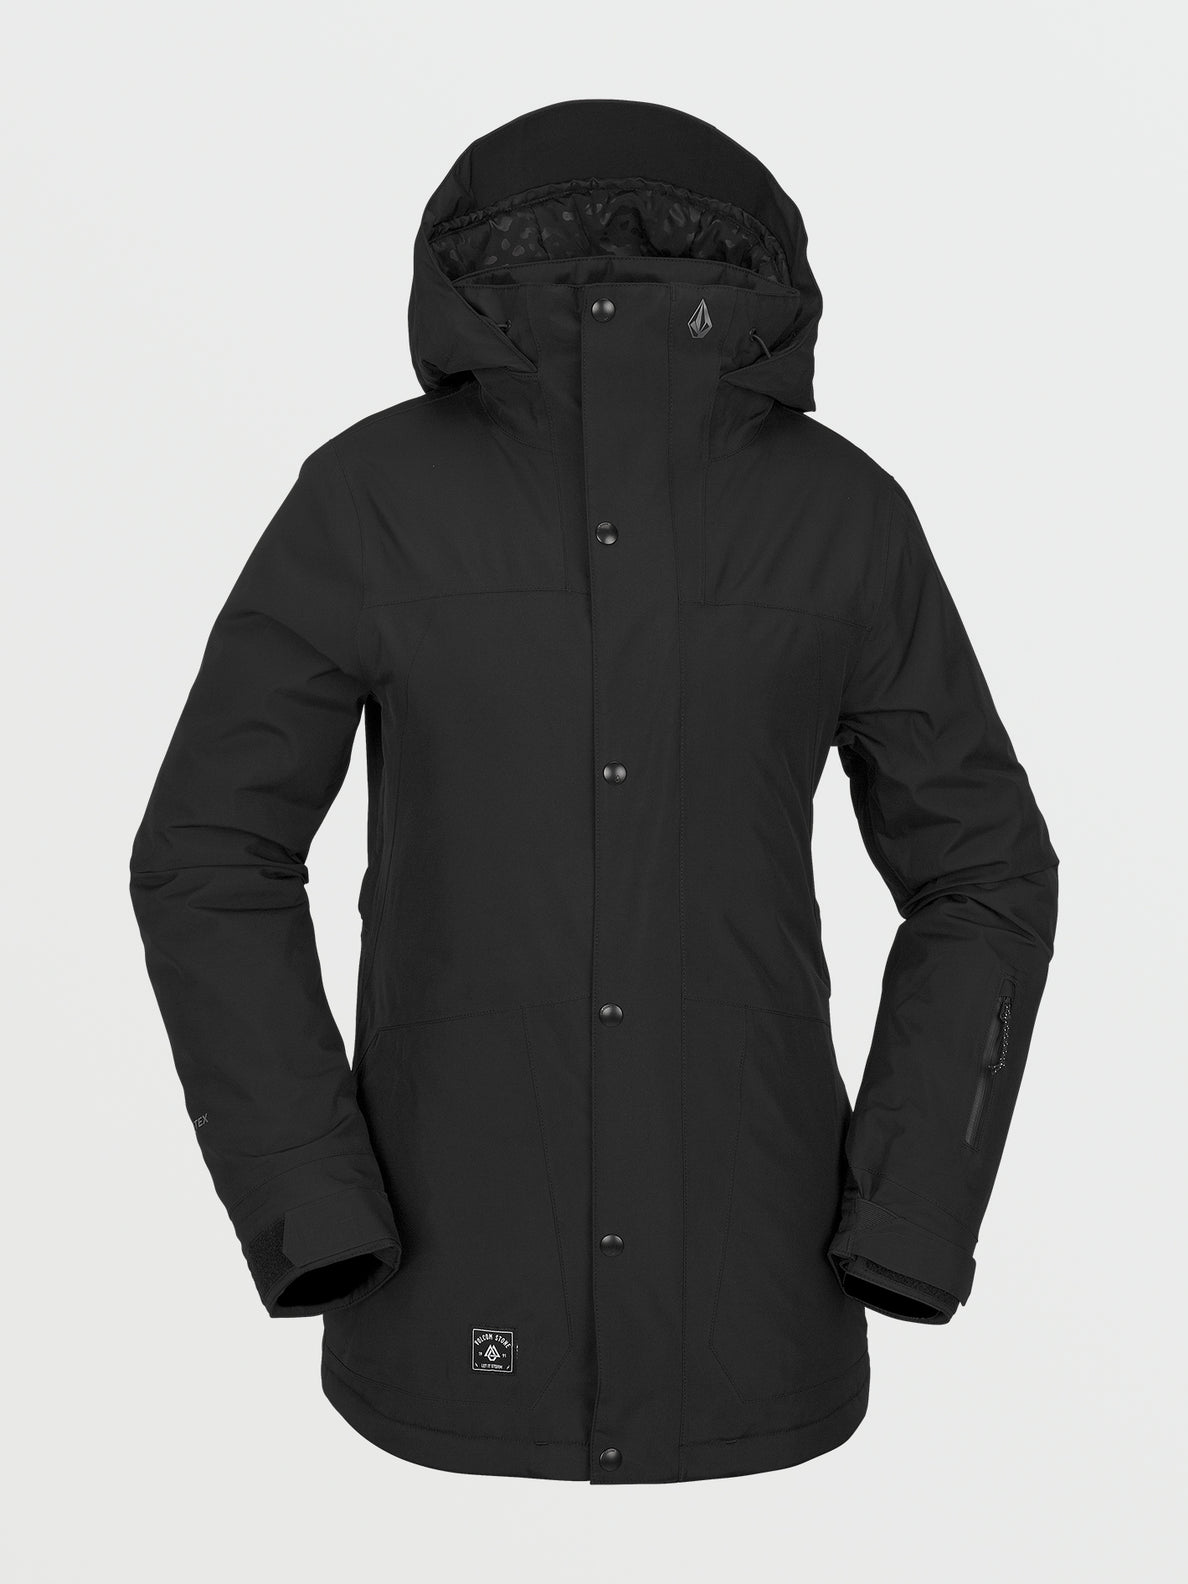 Womens Ell Insulated Gore-Tex Jacket - Black (H0452302_BLK) [10]